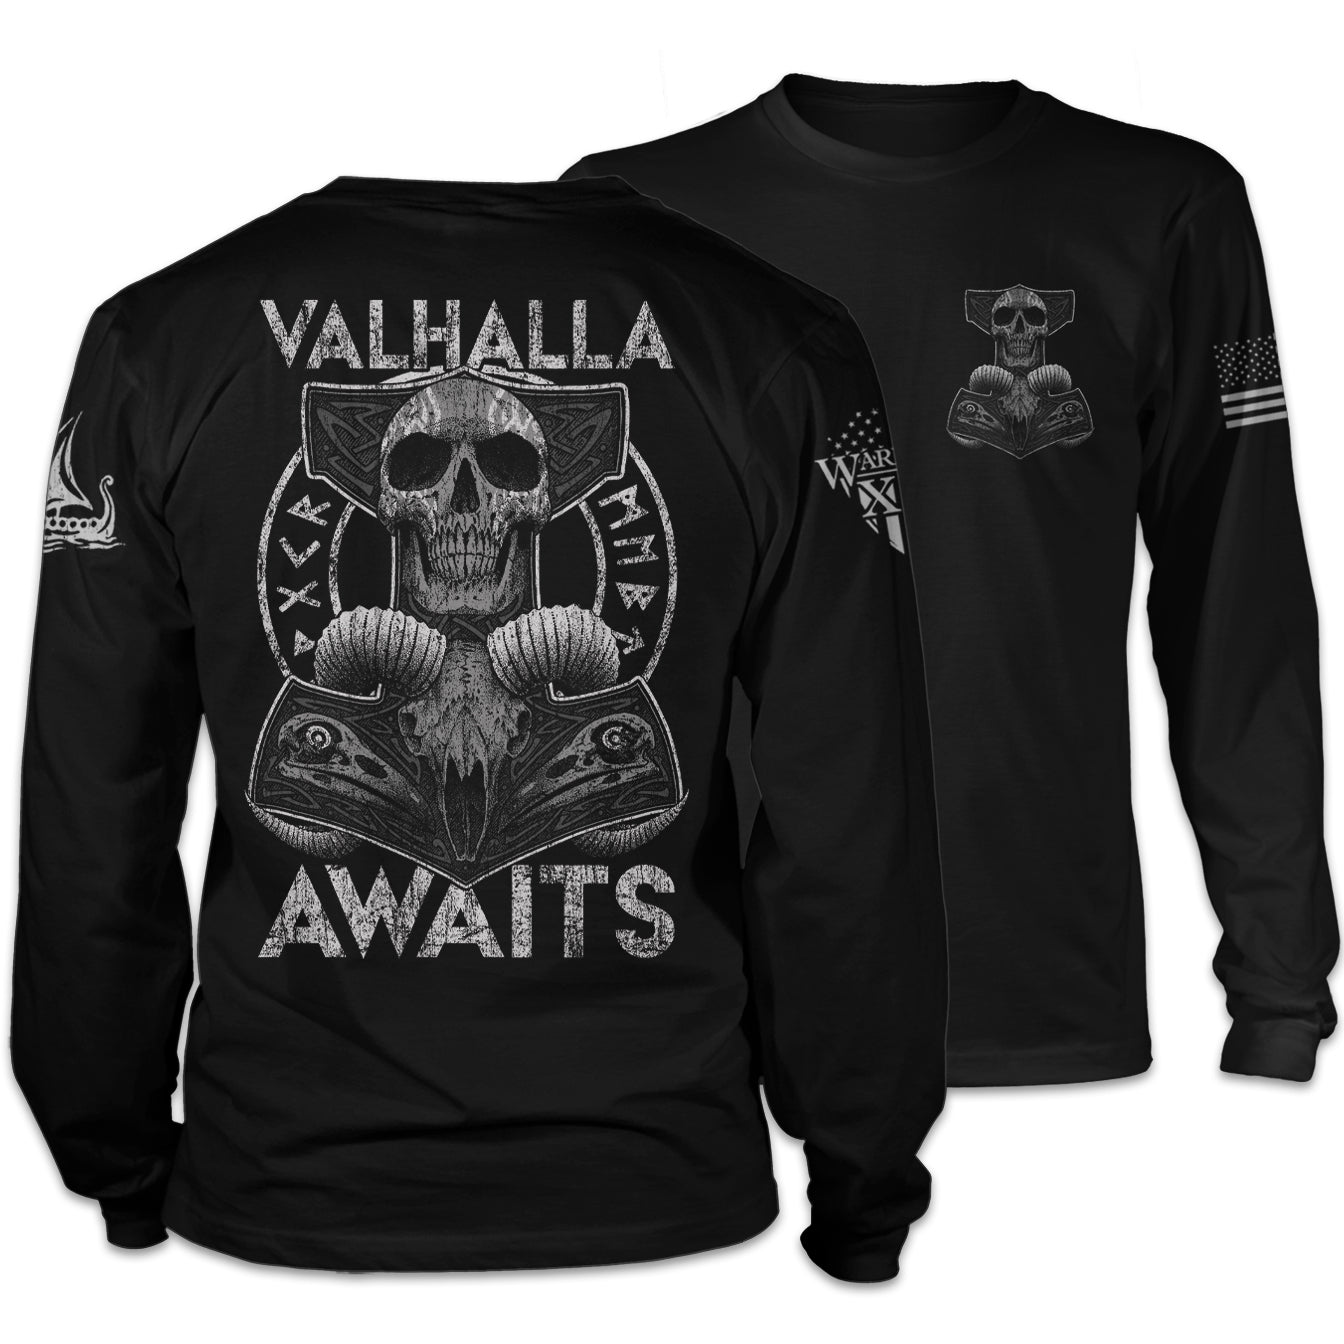 Front & back black long sleeve shirt features a Thor's hammer skull design. The ram skull symbolizes the rams that pulled Thor's chariot.